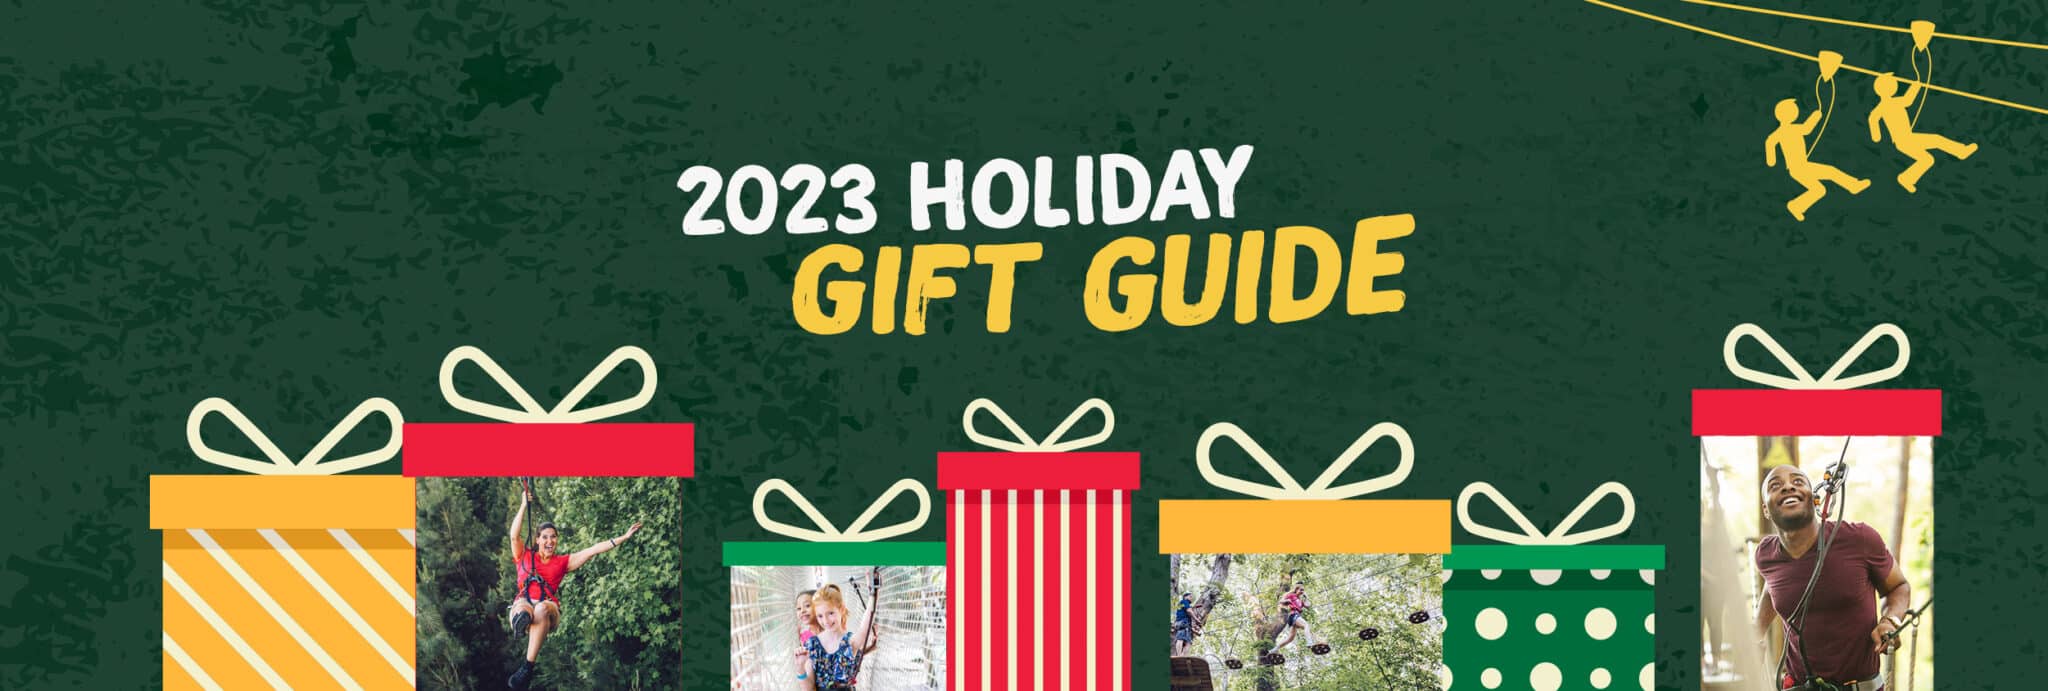 Outdoor Holiday Gift Guide